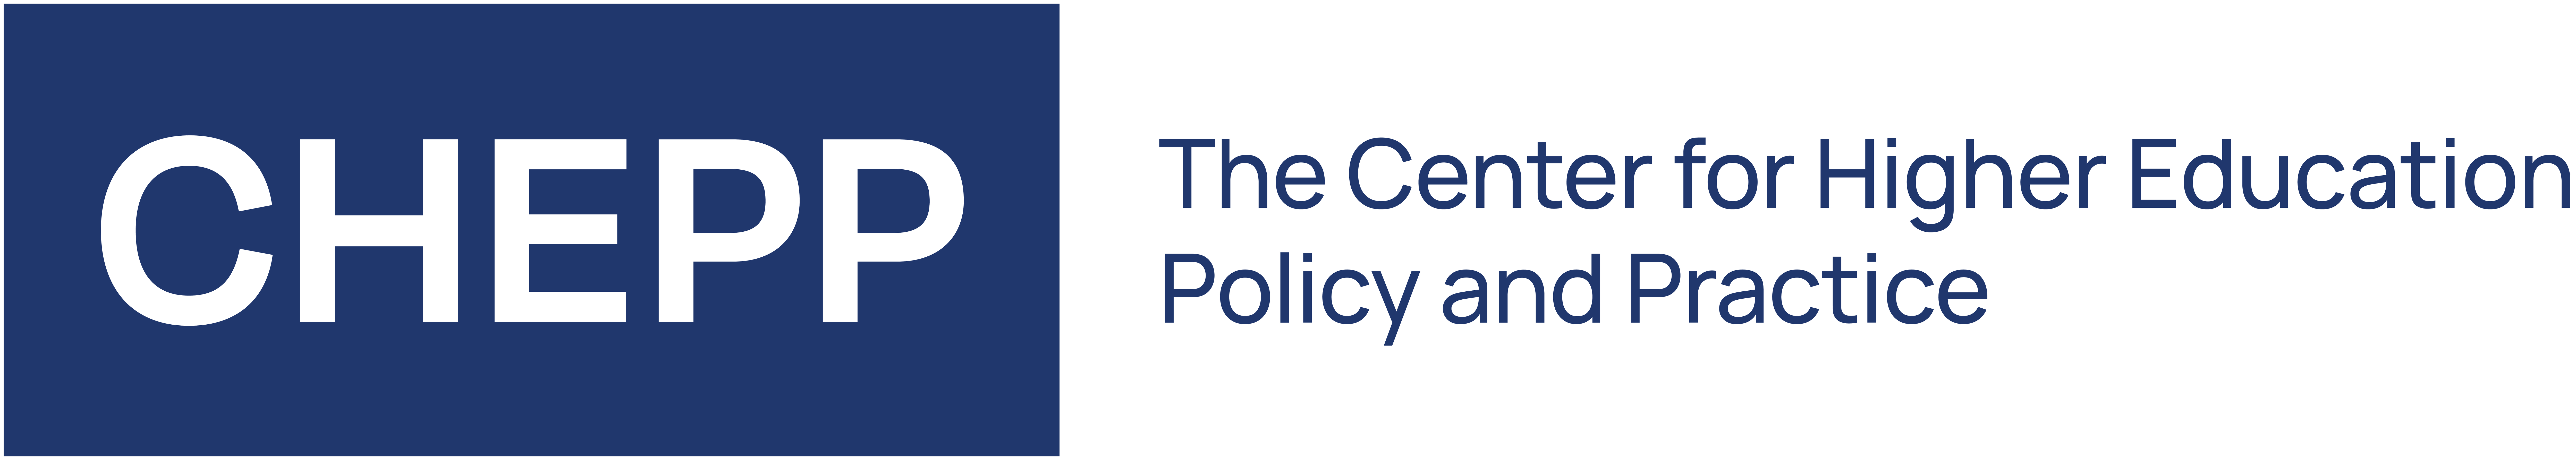 The Center for Higher Education Policy and Practice Logo